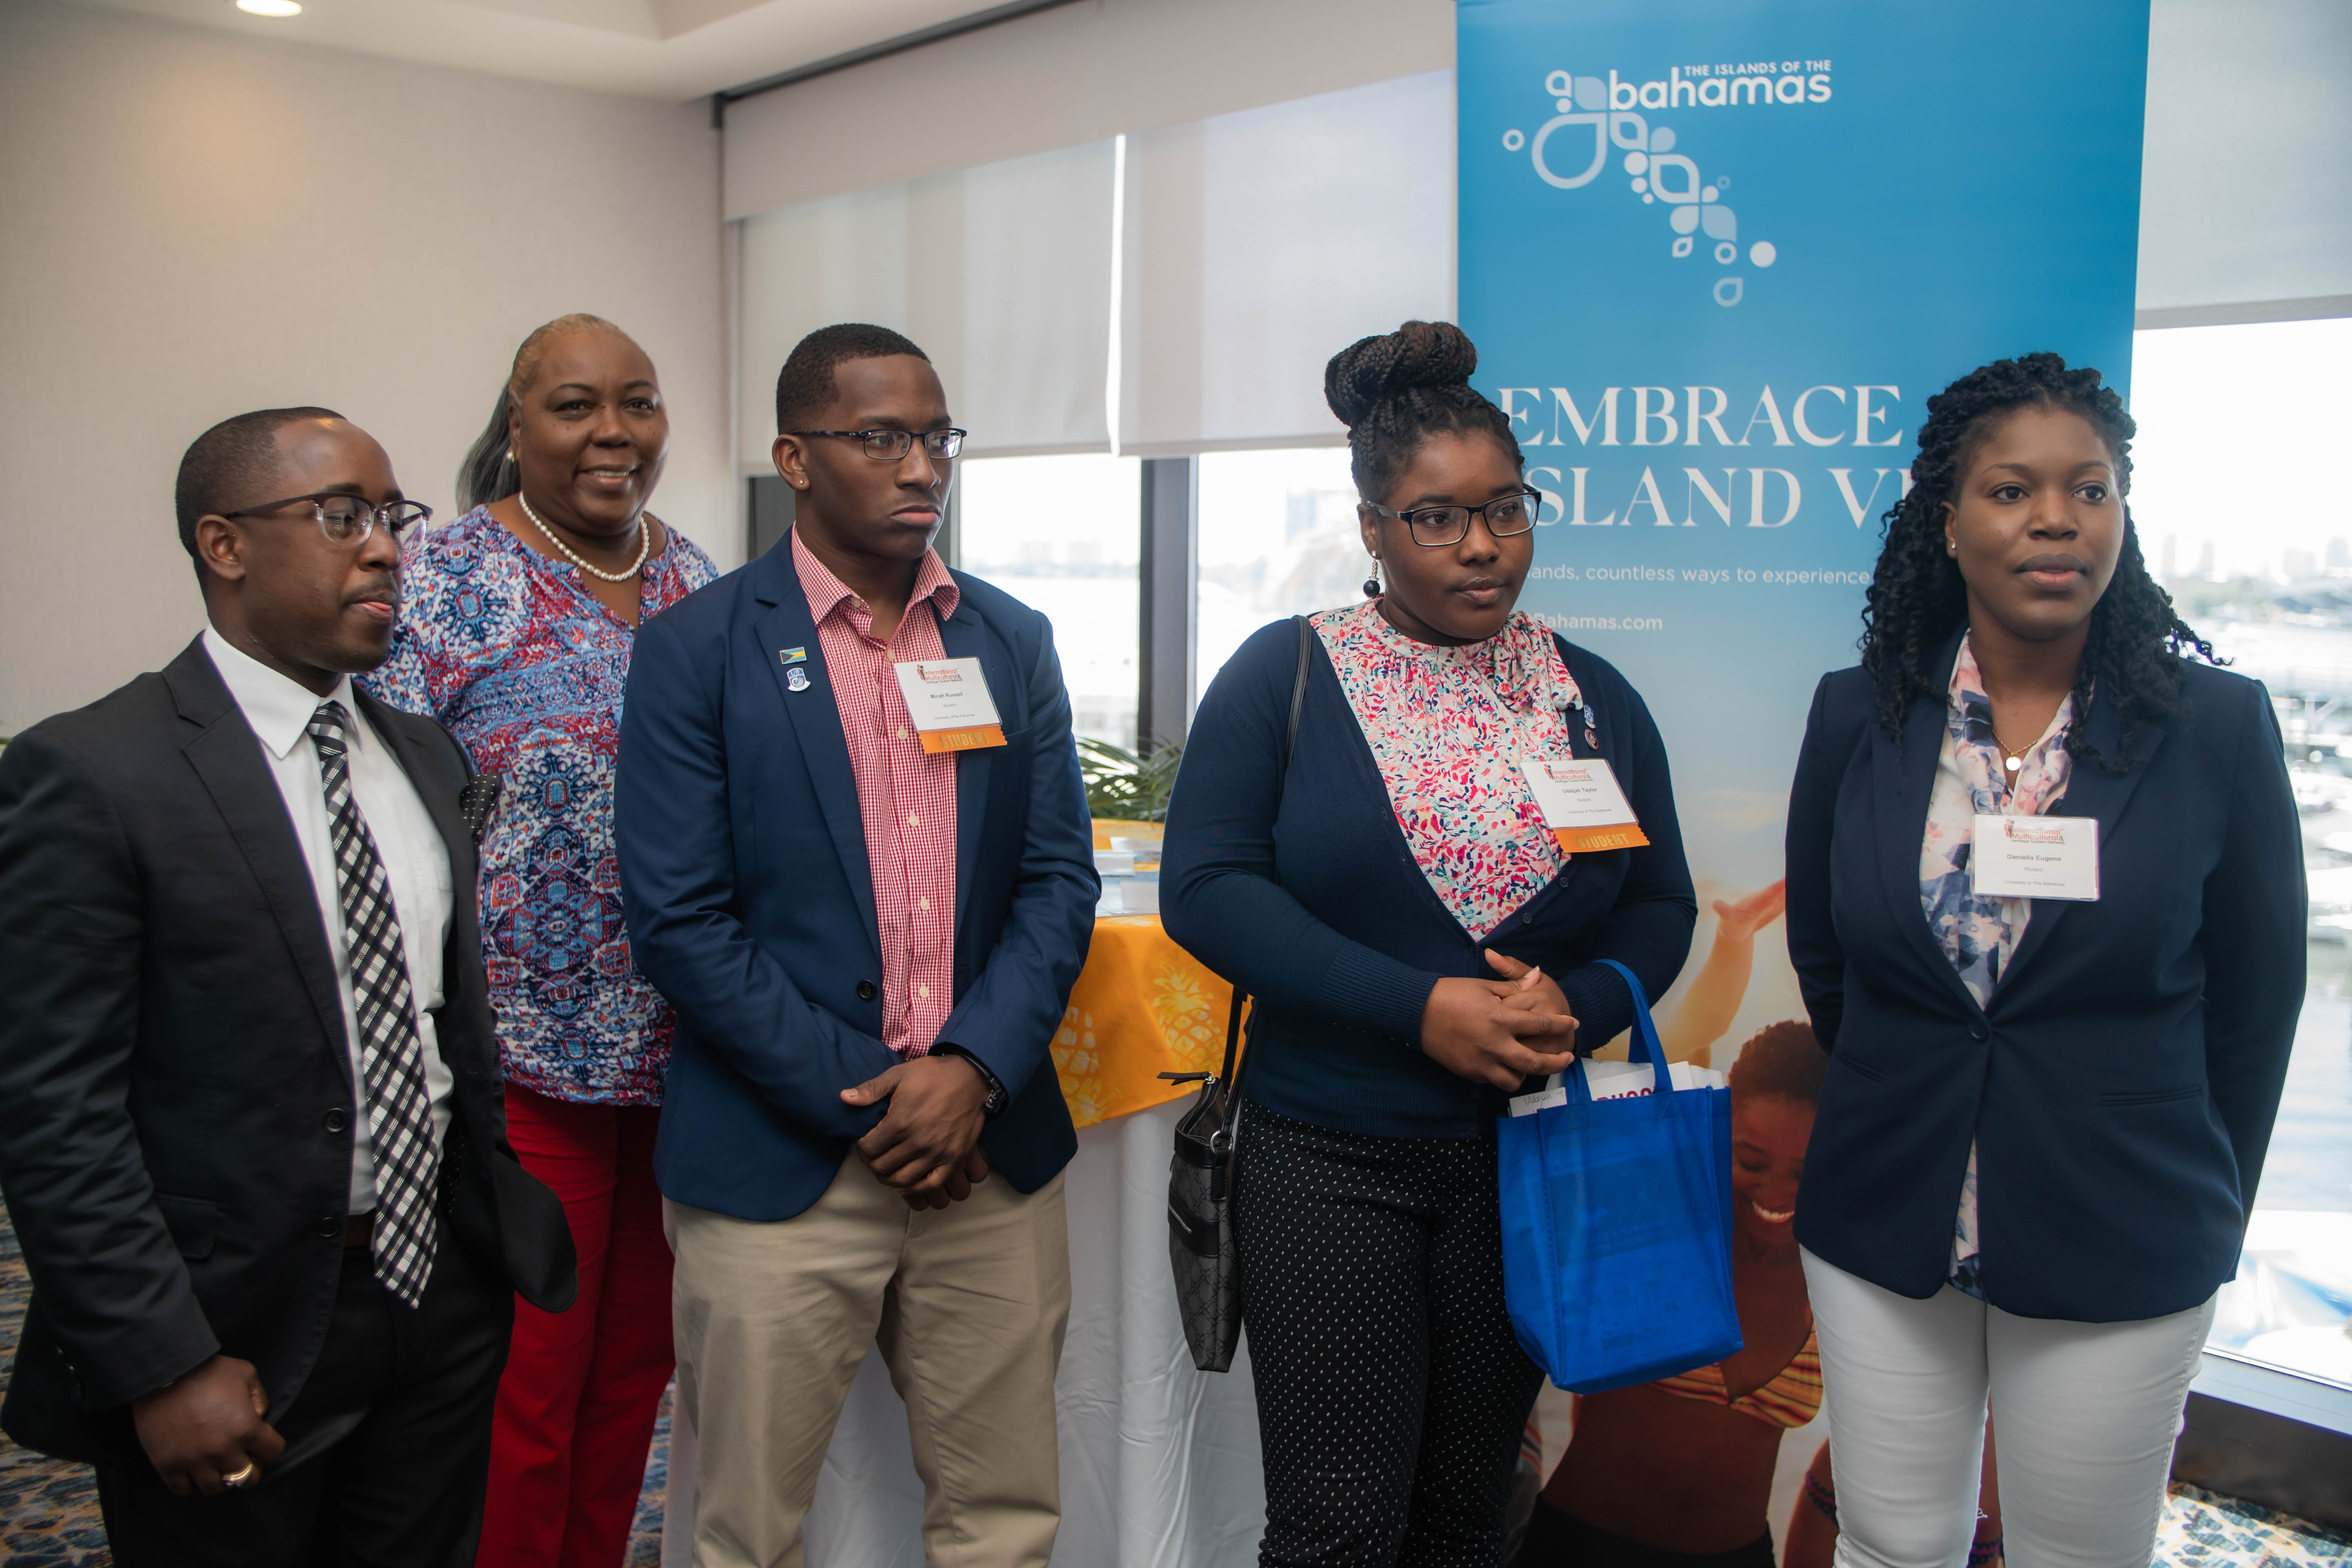 Pictured are Bahamian students who were in attendance at the recent Annual Summit and Trade Show of the National Association of Black Hotel Owners, Operators and Developers and the International Multicultural and Heritage Tourism Network in Miami, Florida